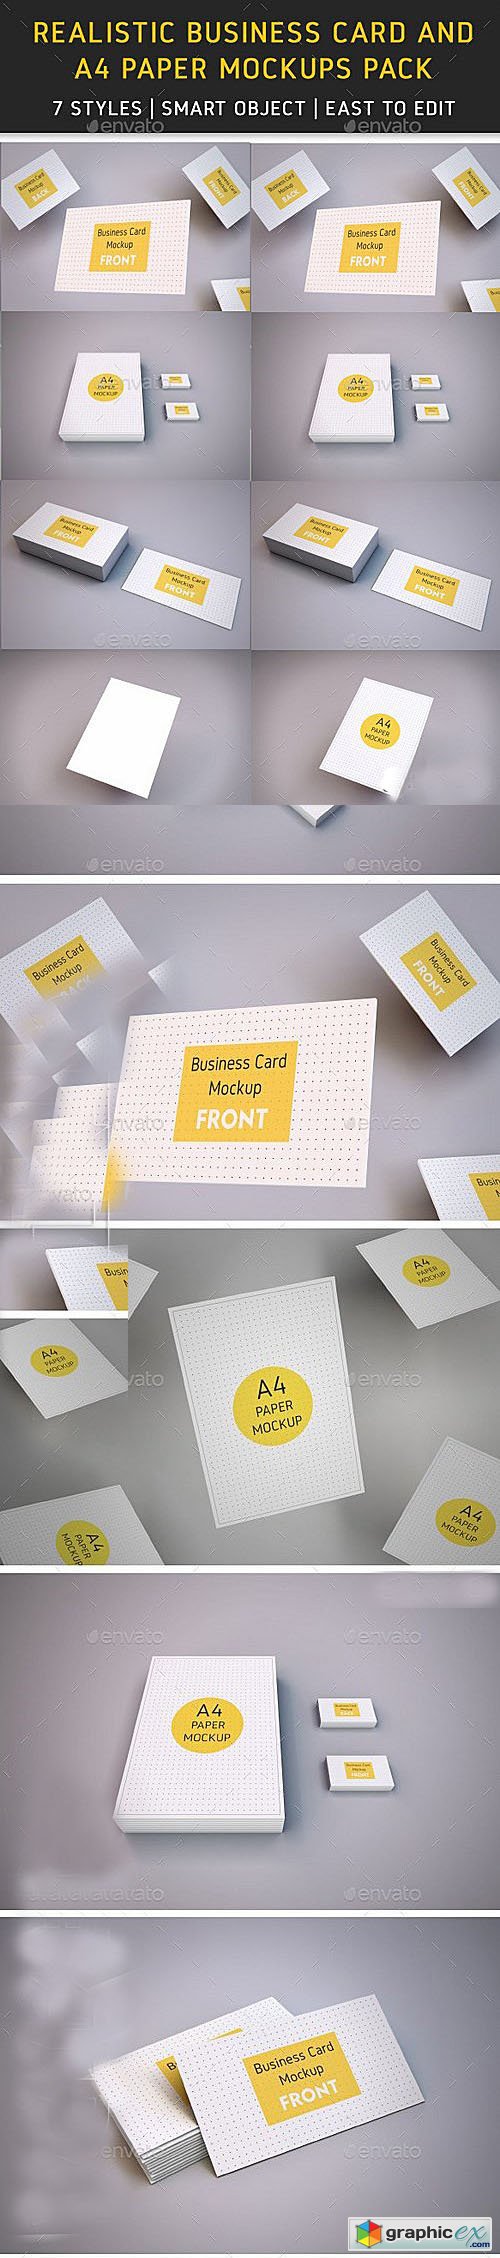 Realistic Business Card and A4 paper Mockup Pack